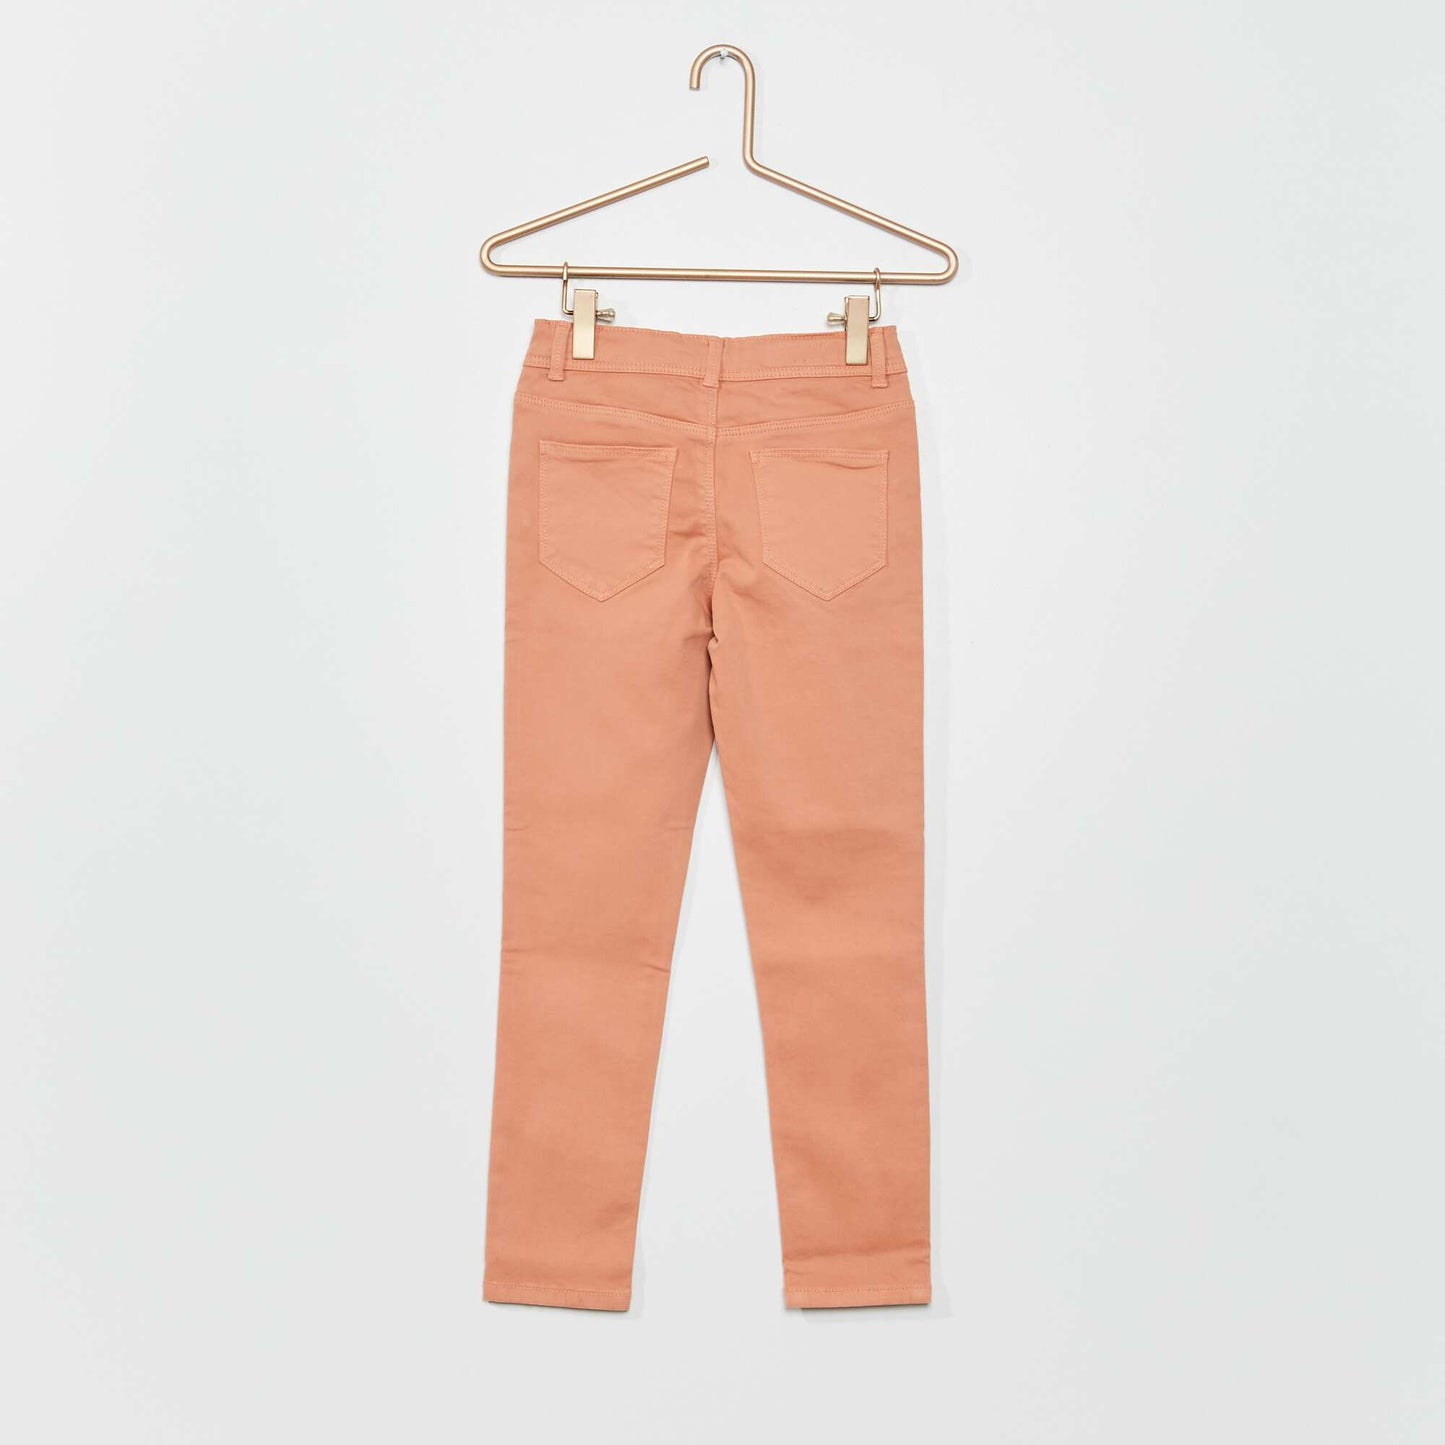 Jean skinny 5 poches vieux rose